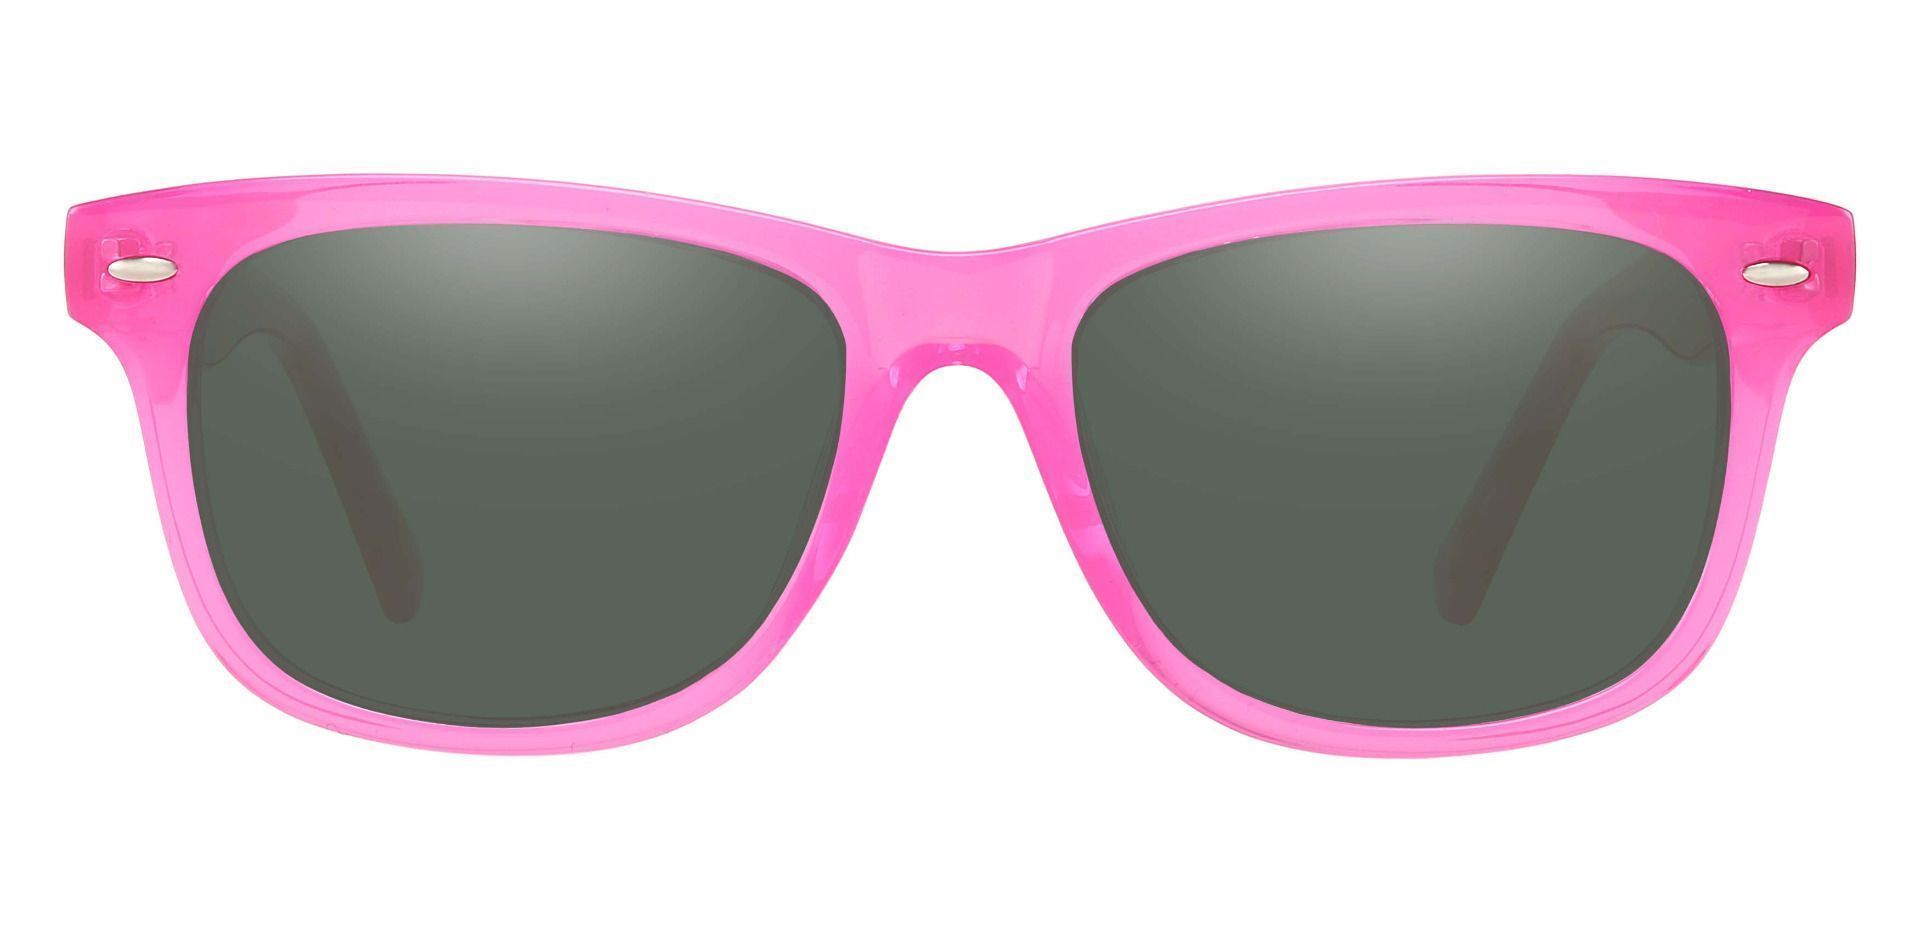 Eureka Square Non-Rx Sunglasses - Pink Frame With Green Lenses